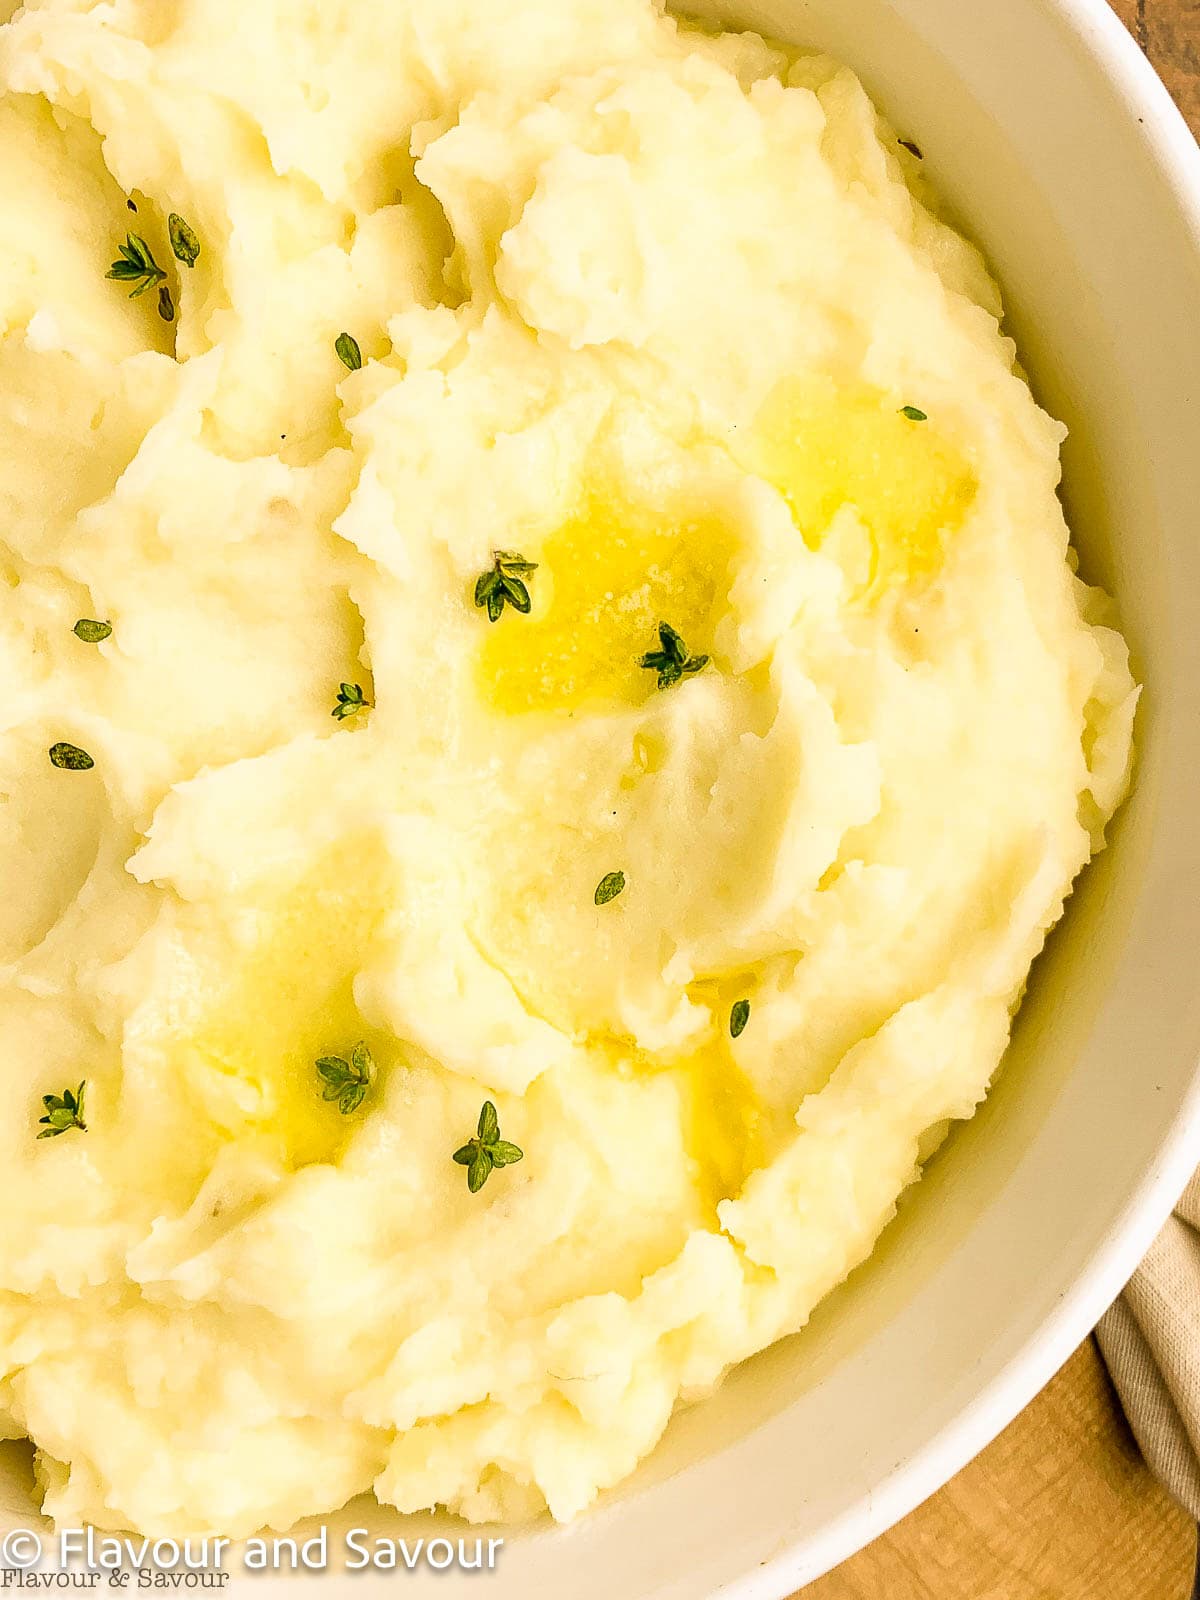 A bowl of mashed potatoes with butter and fresh thyme leaves.